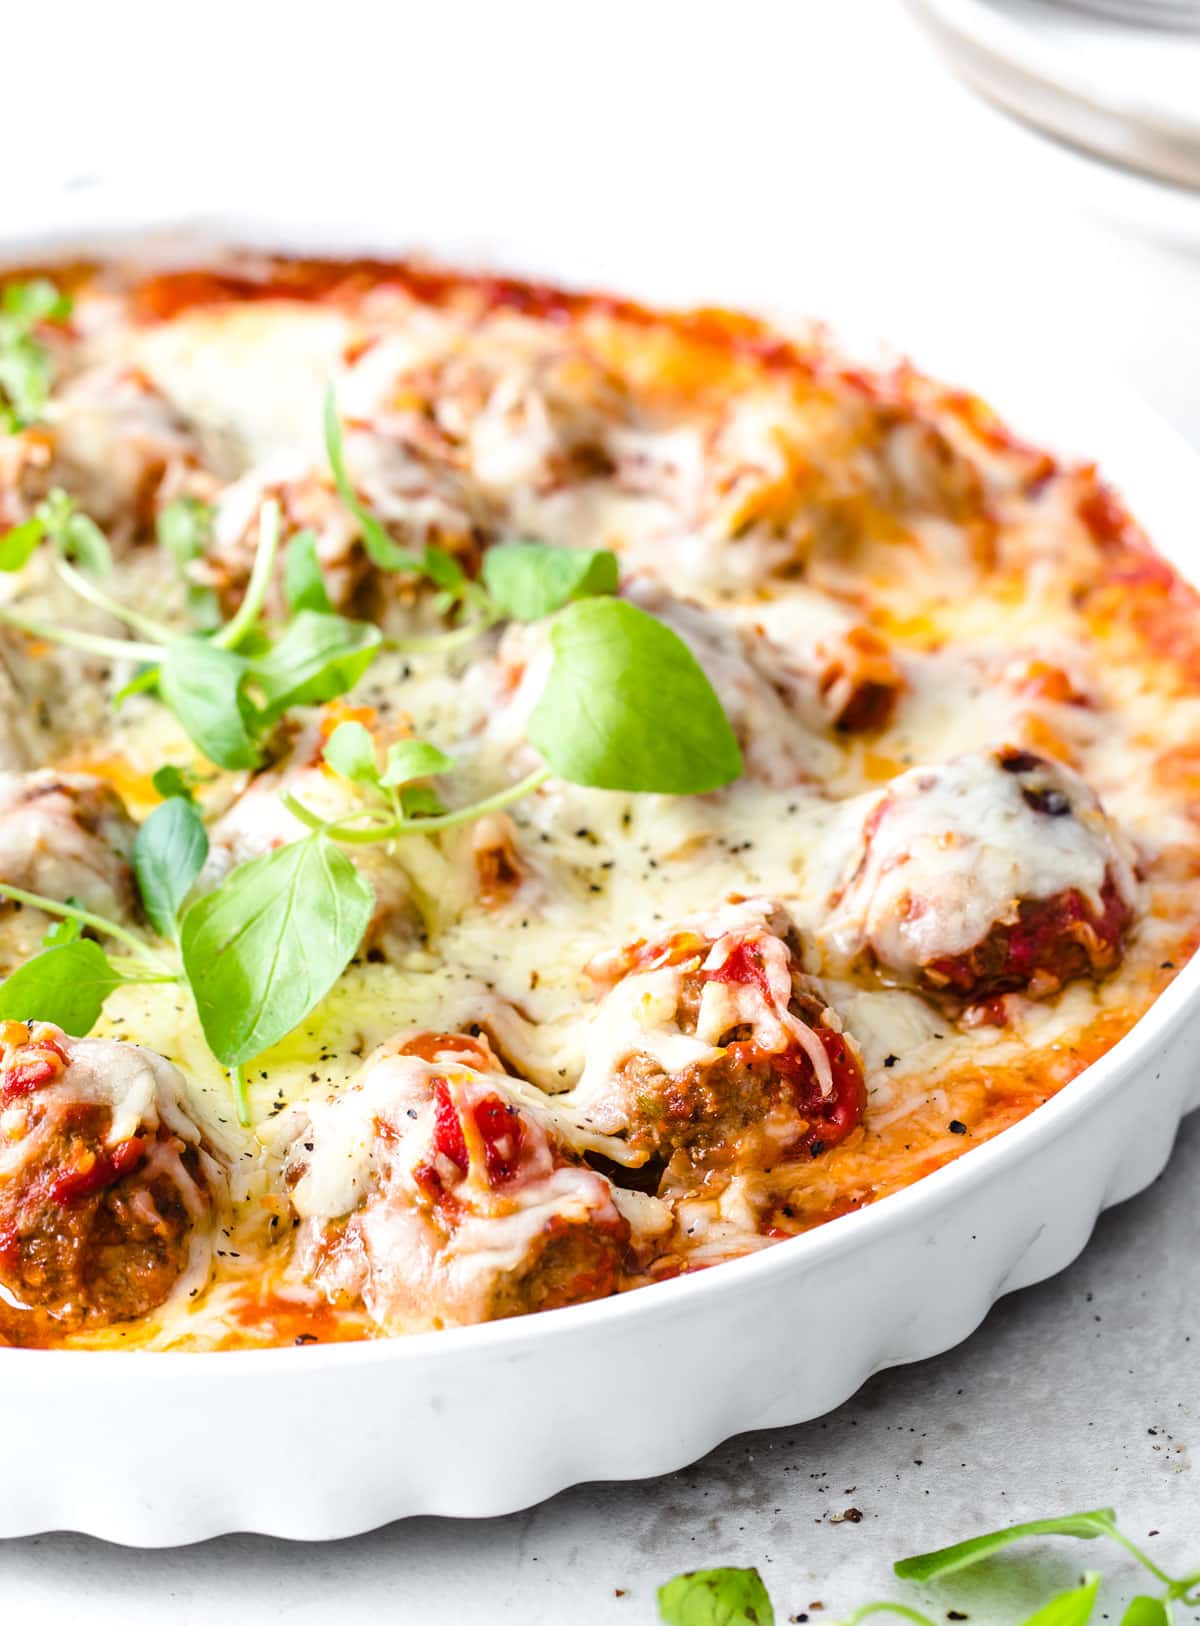 Meatballs in a round casserole in tomato sauce topped with cheese.